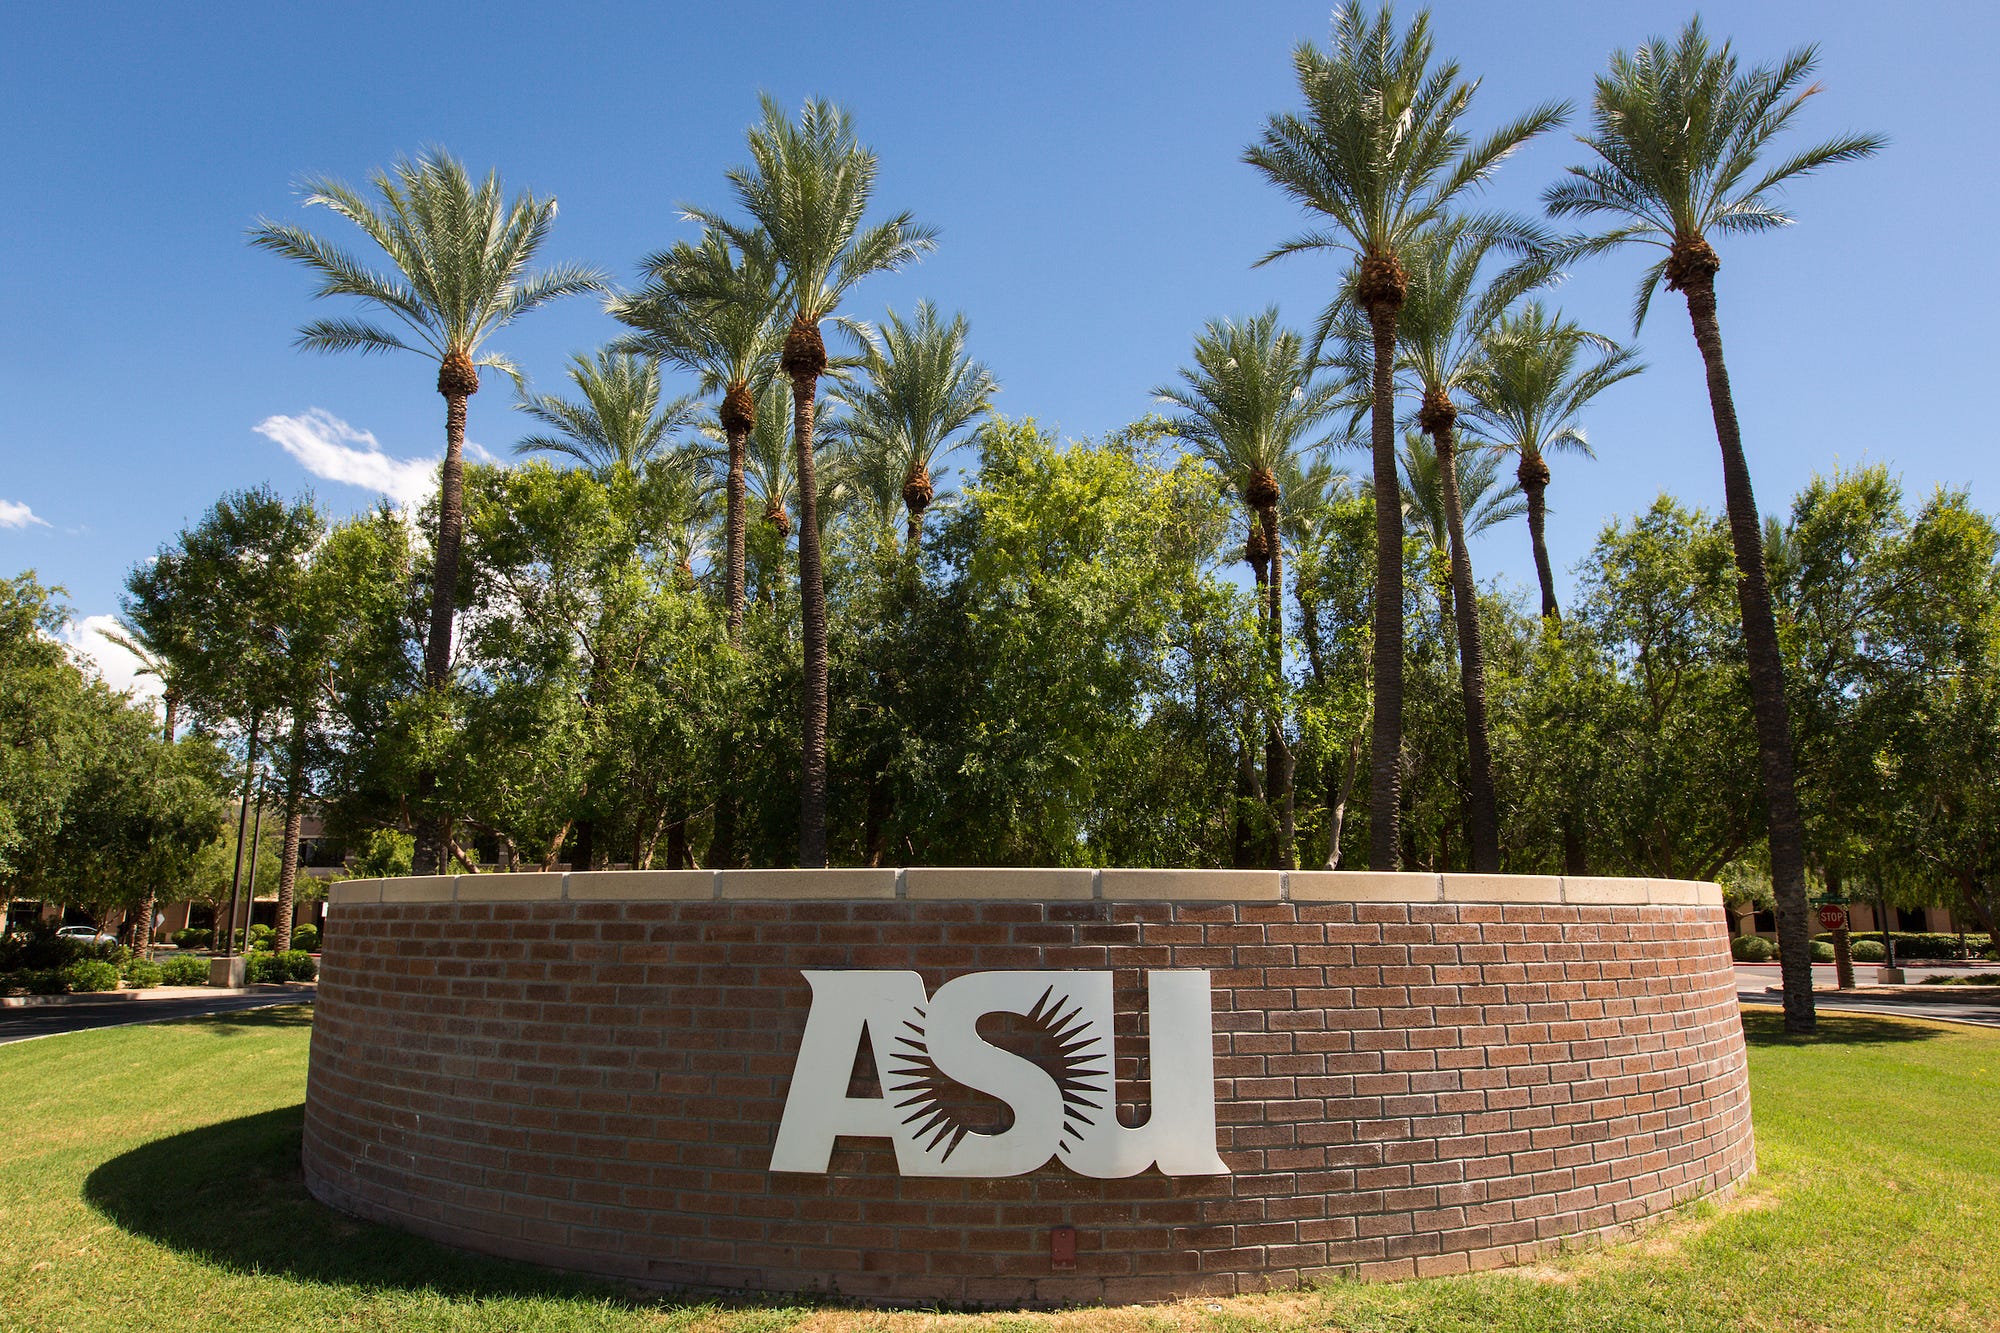 5 Places To See When Visiting Asu West Campus Arizona State